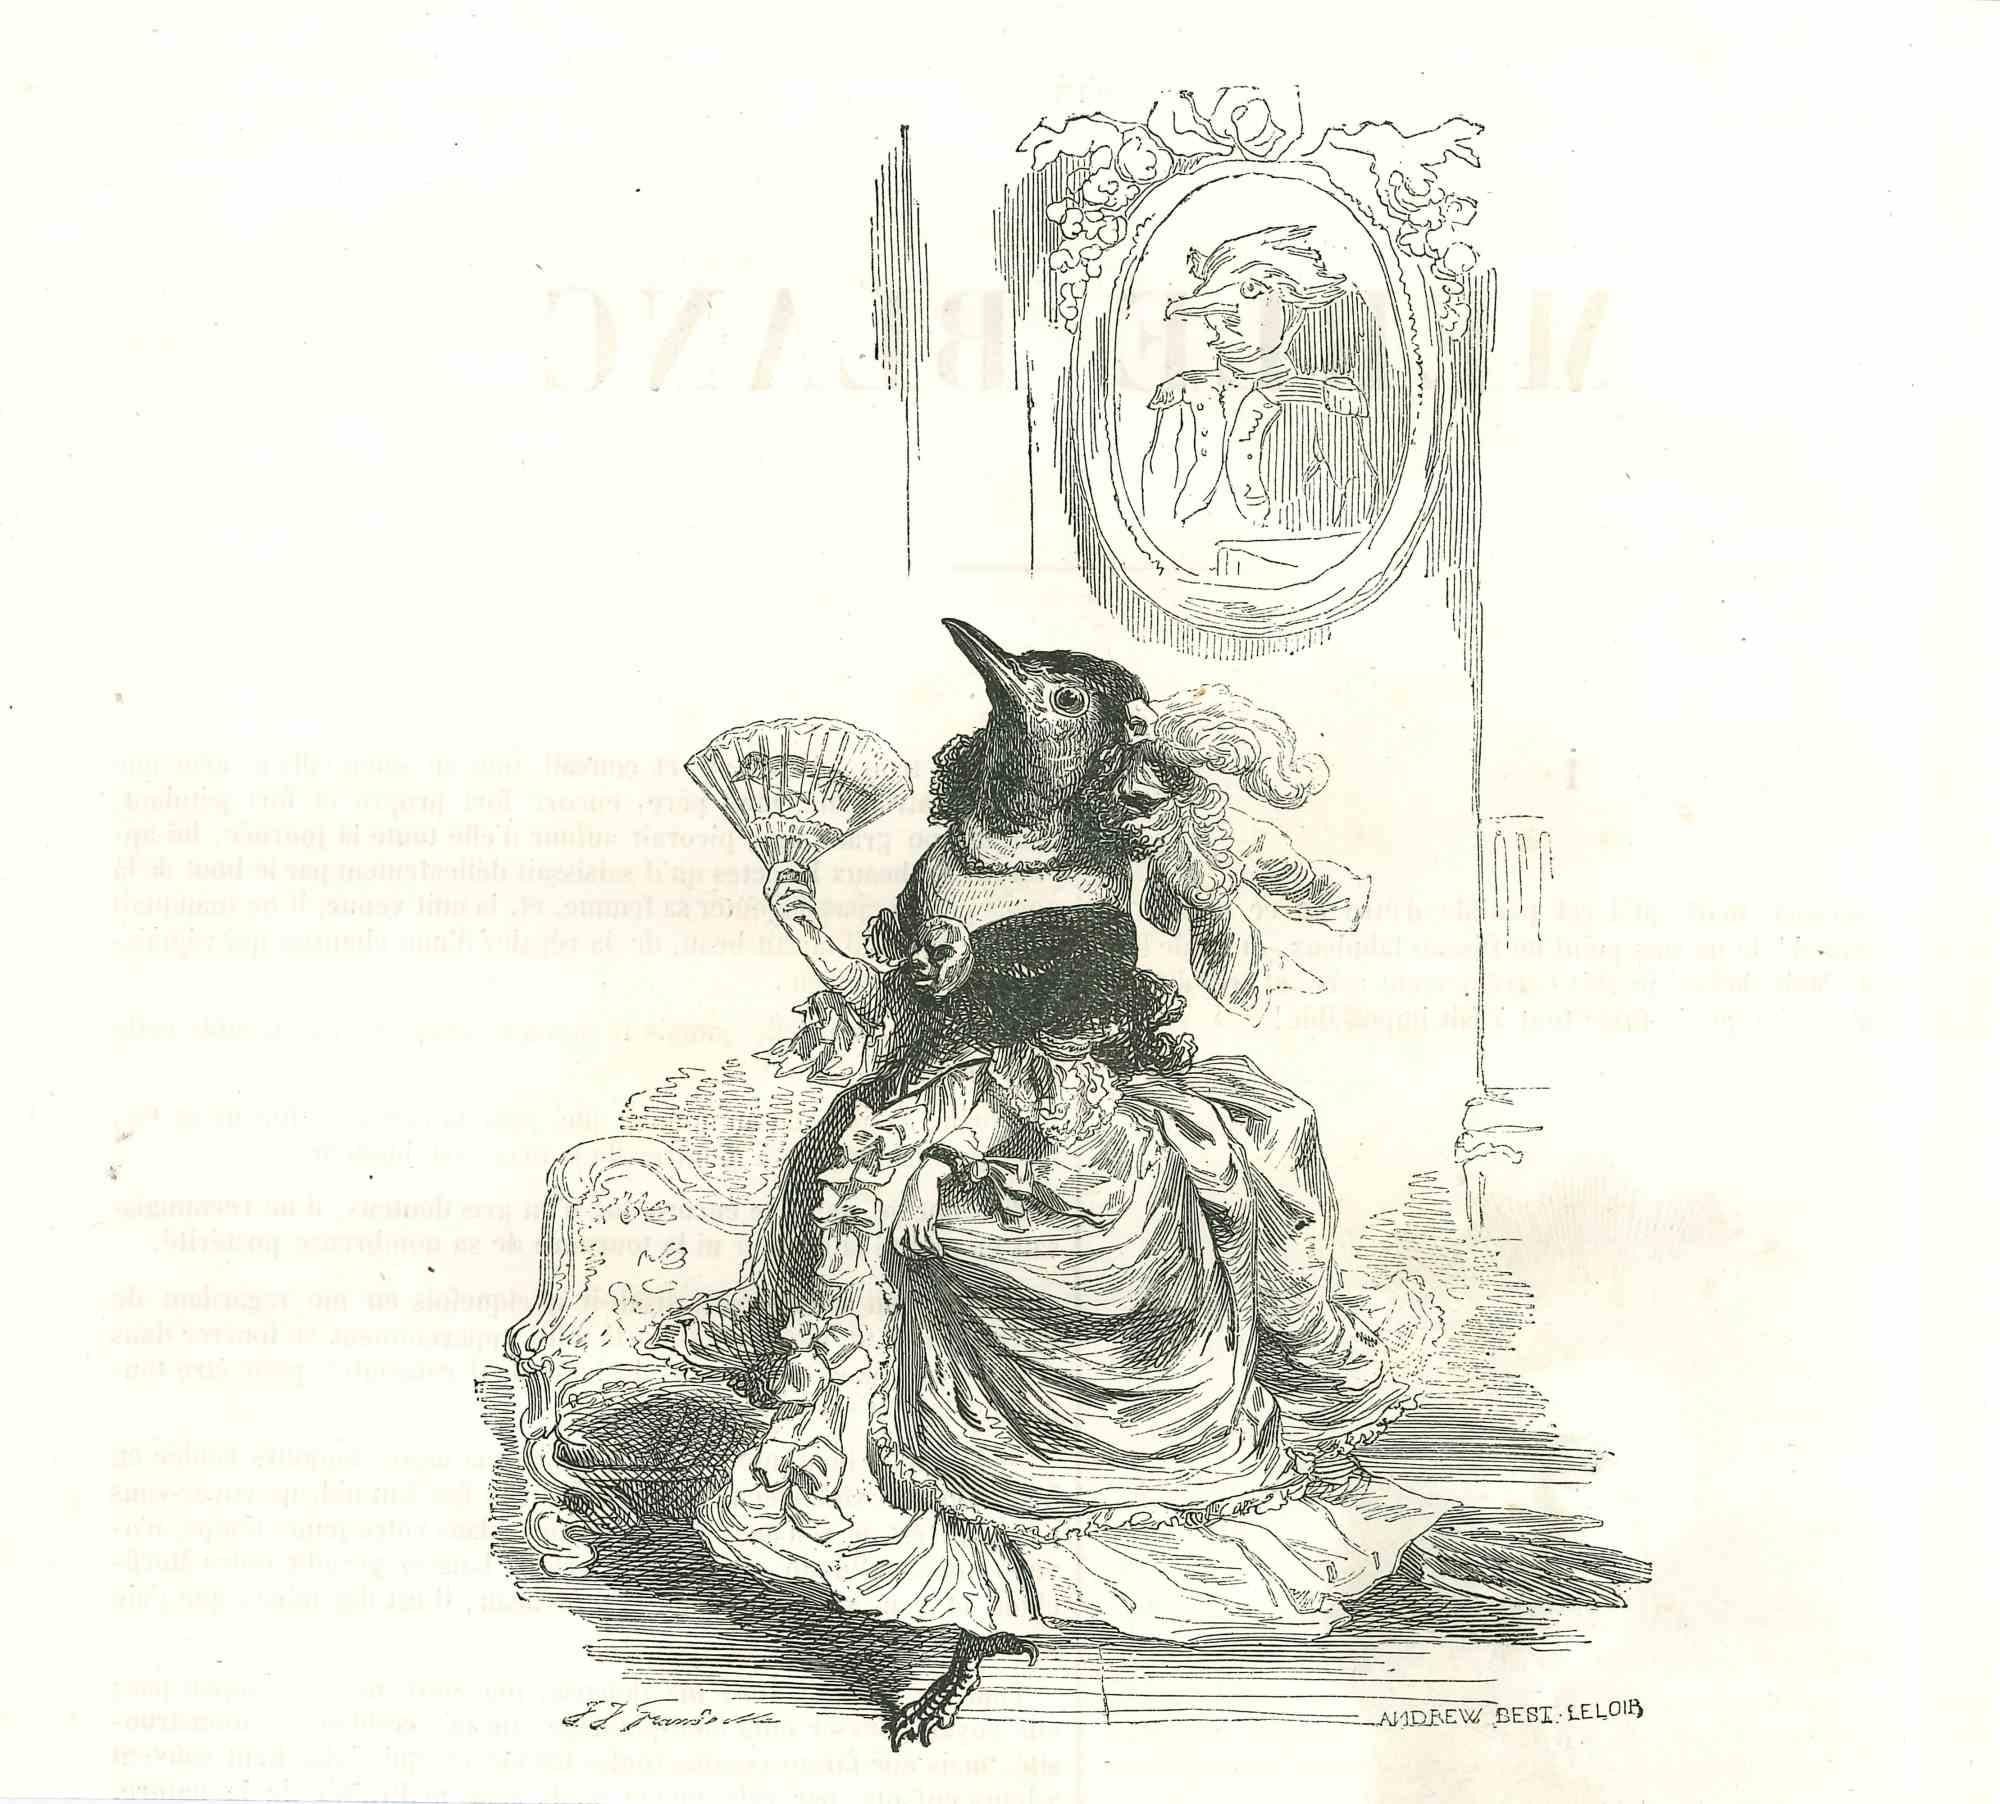 Jean Jeacques Grandville Figurative Print - The Lady Dunlin With Her Hand Fan - Original Lithograph by J.J Grandville - 1852